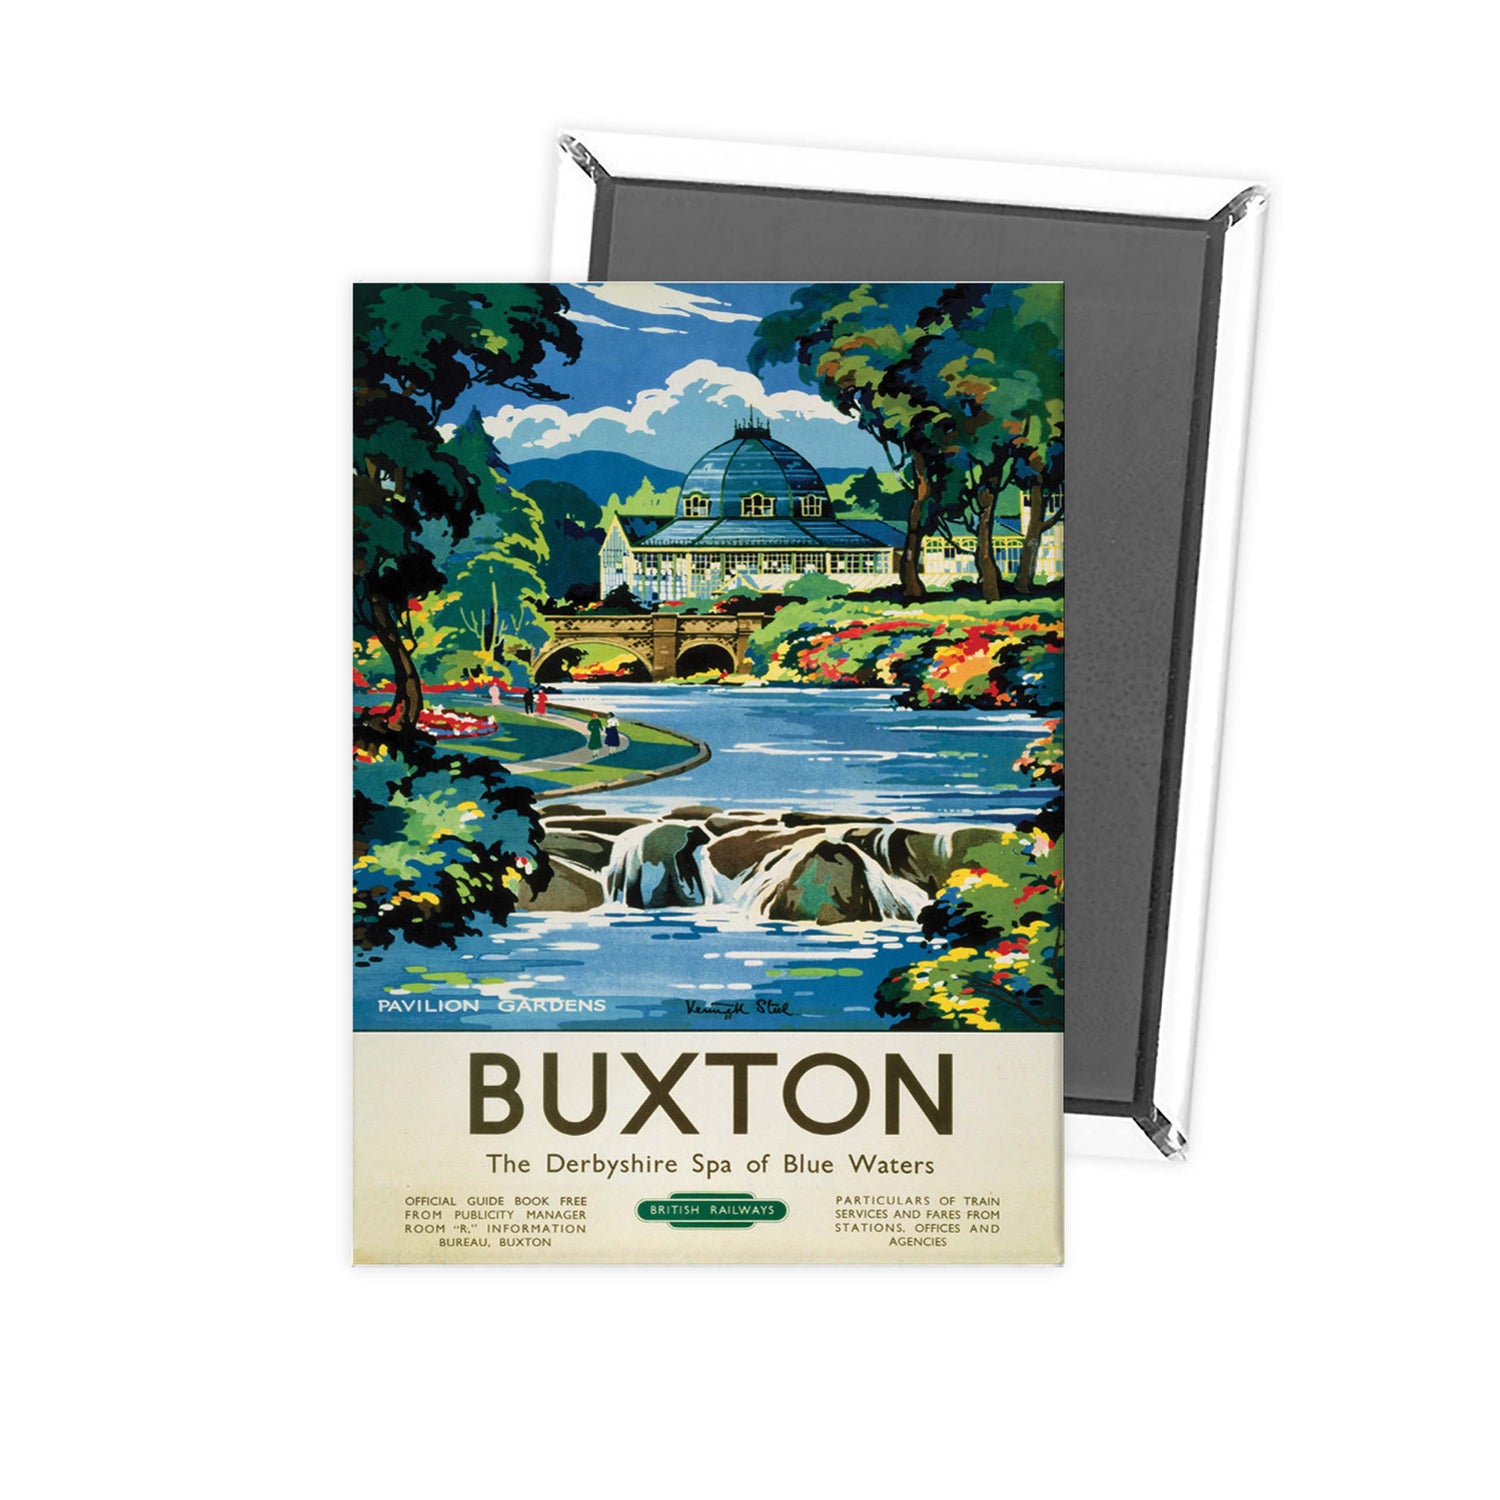 Buxton - The derbyshire spa of Blue waters Fridge Magnet